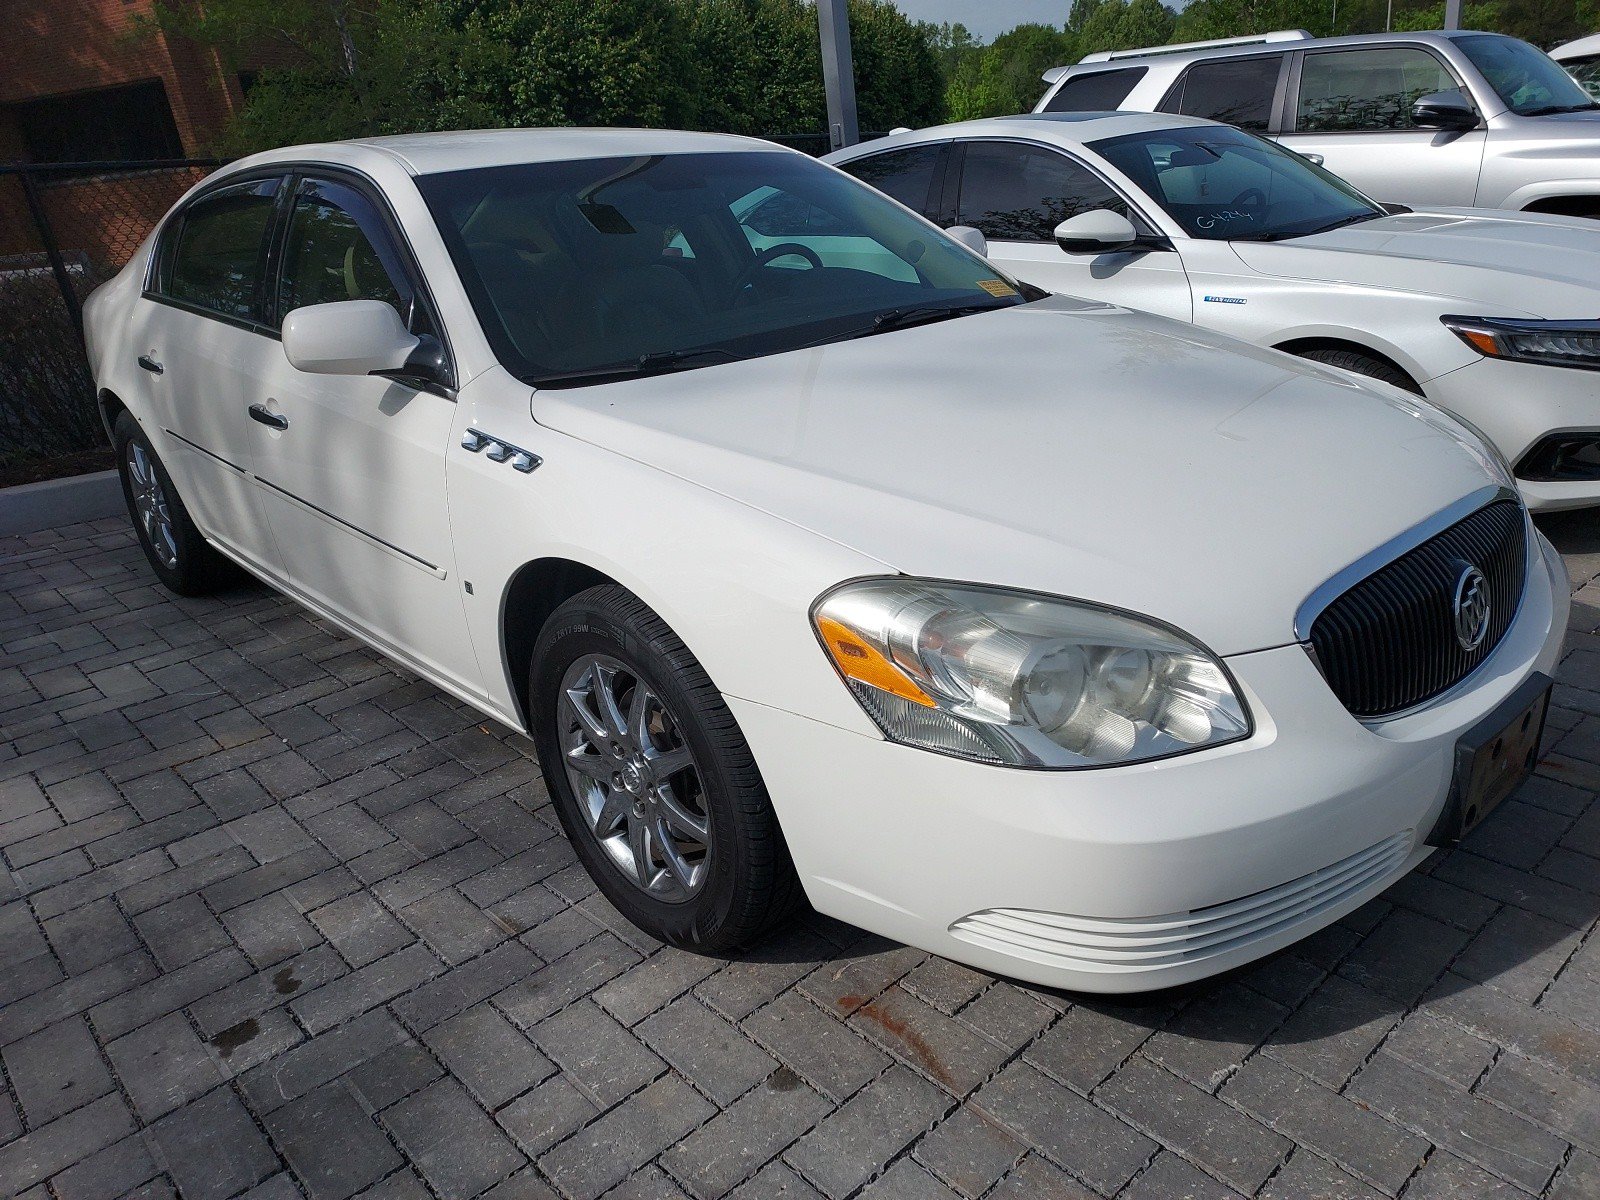 Pre-Owned 2007 Buick Lucerne V6 CXL 4dr Car in Antioch #C7U142442 | Beaman  Buick GMC